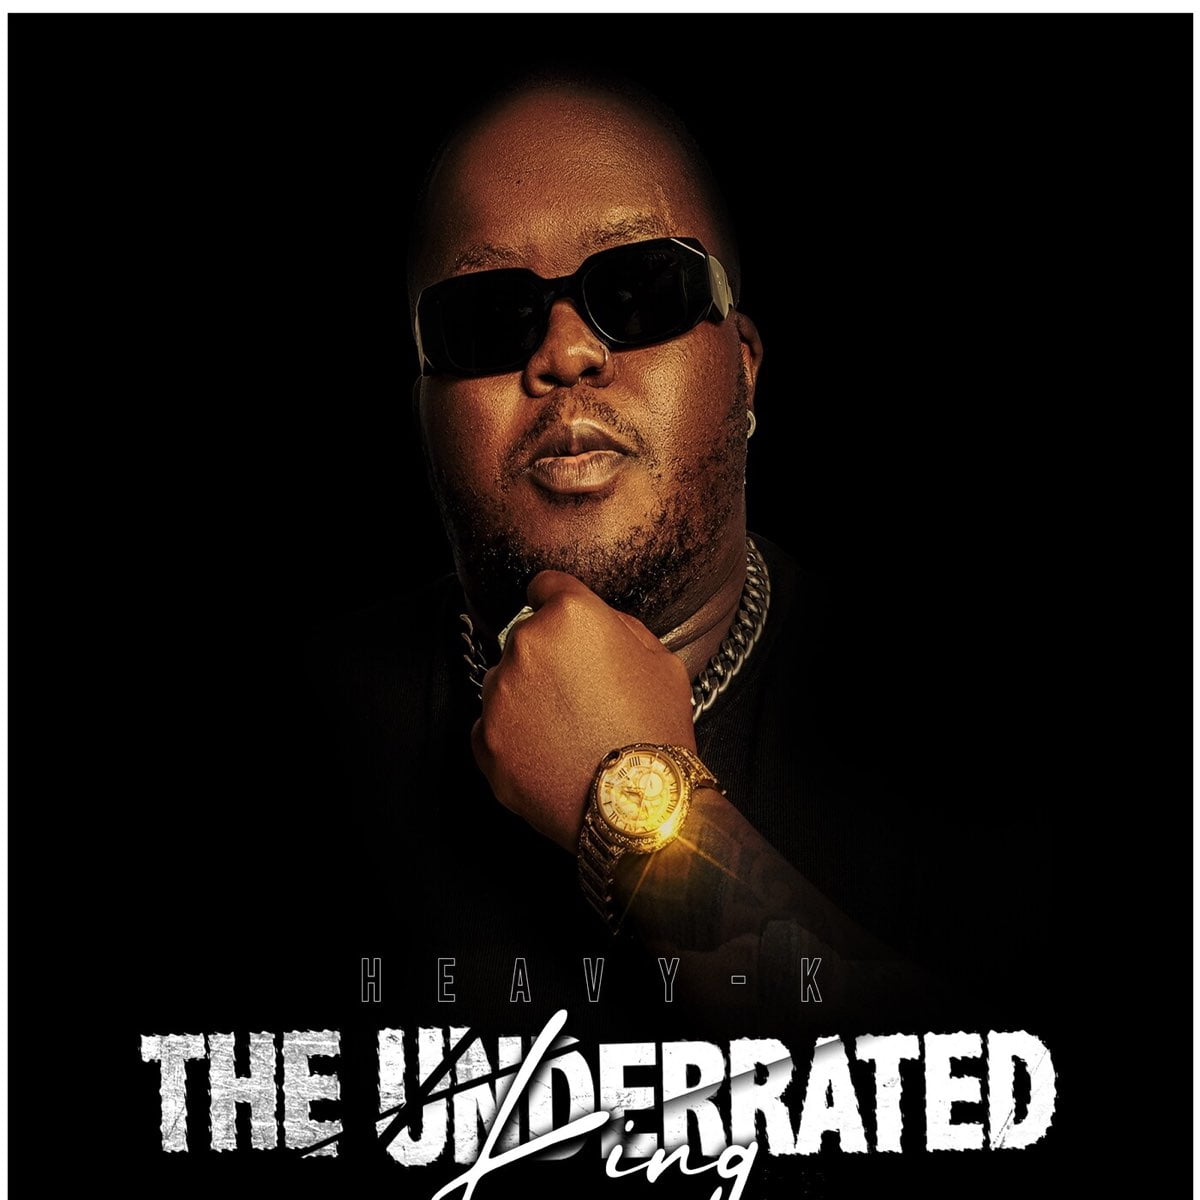 The Underrated King by Heavy K | Album